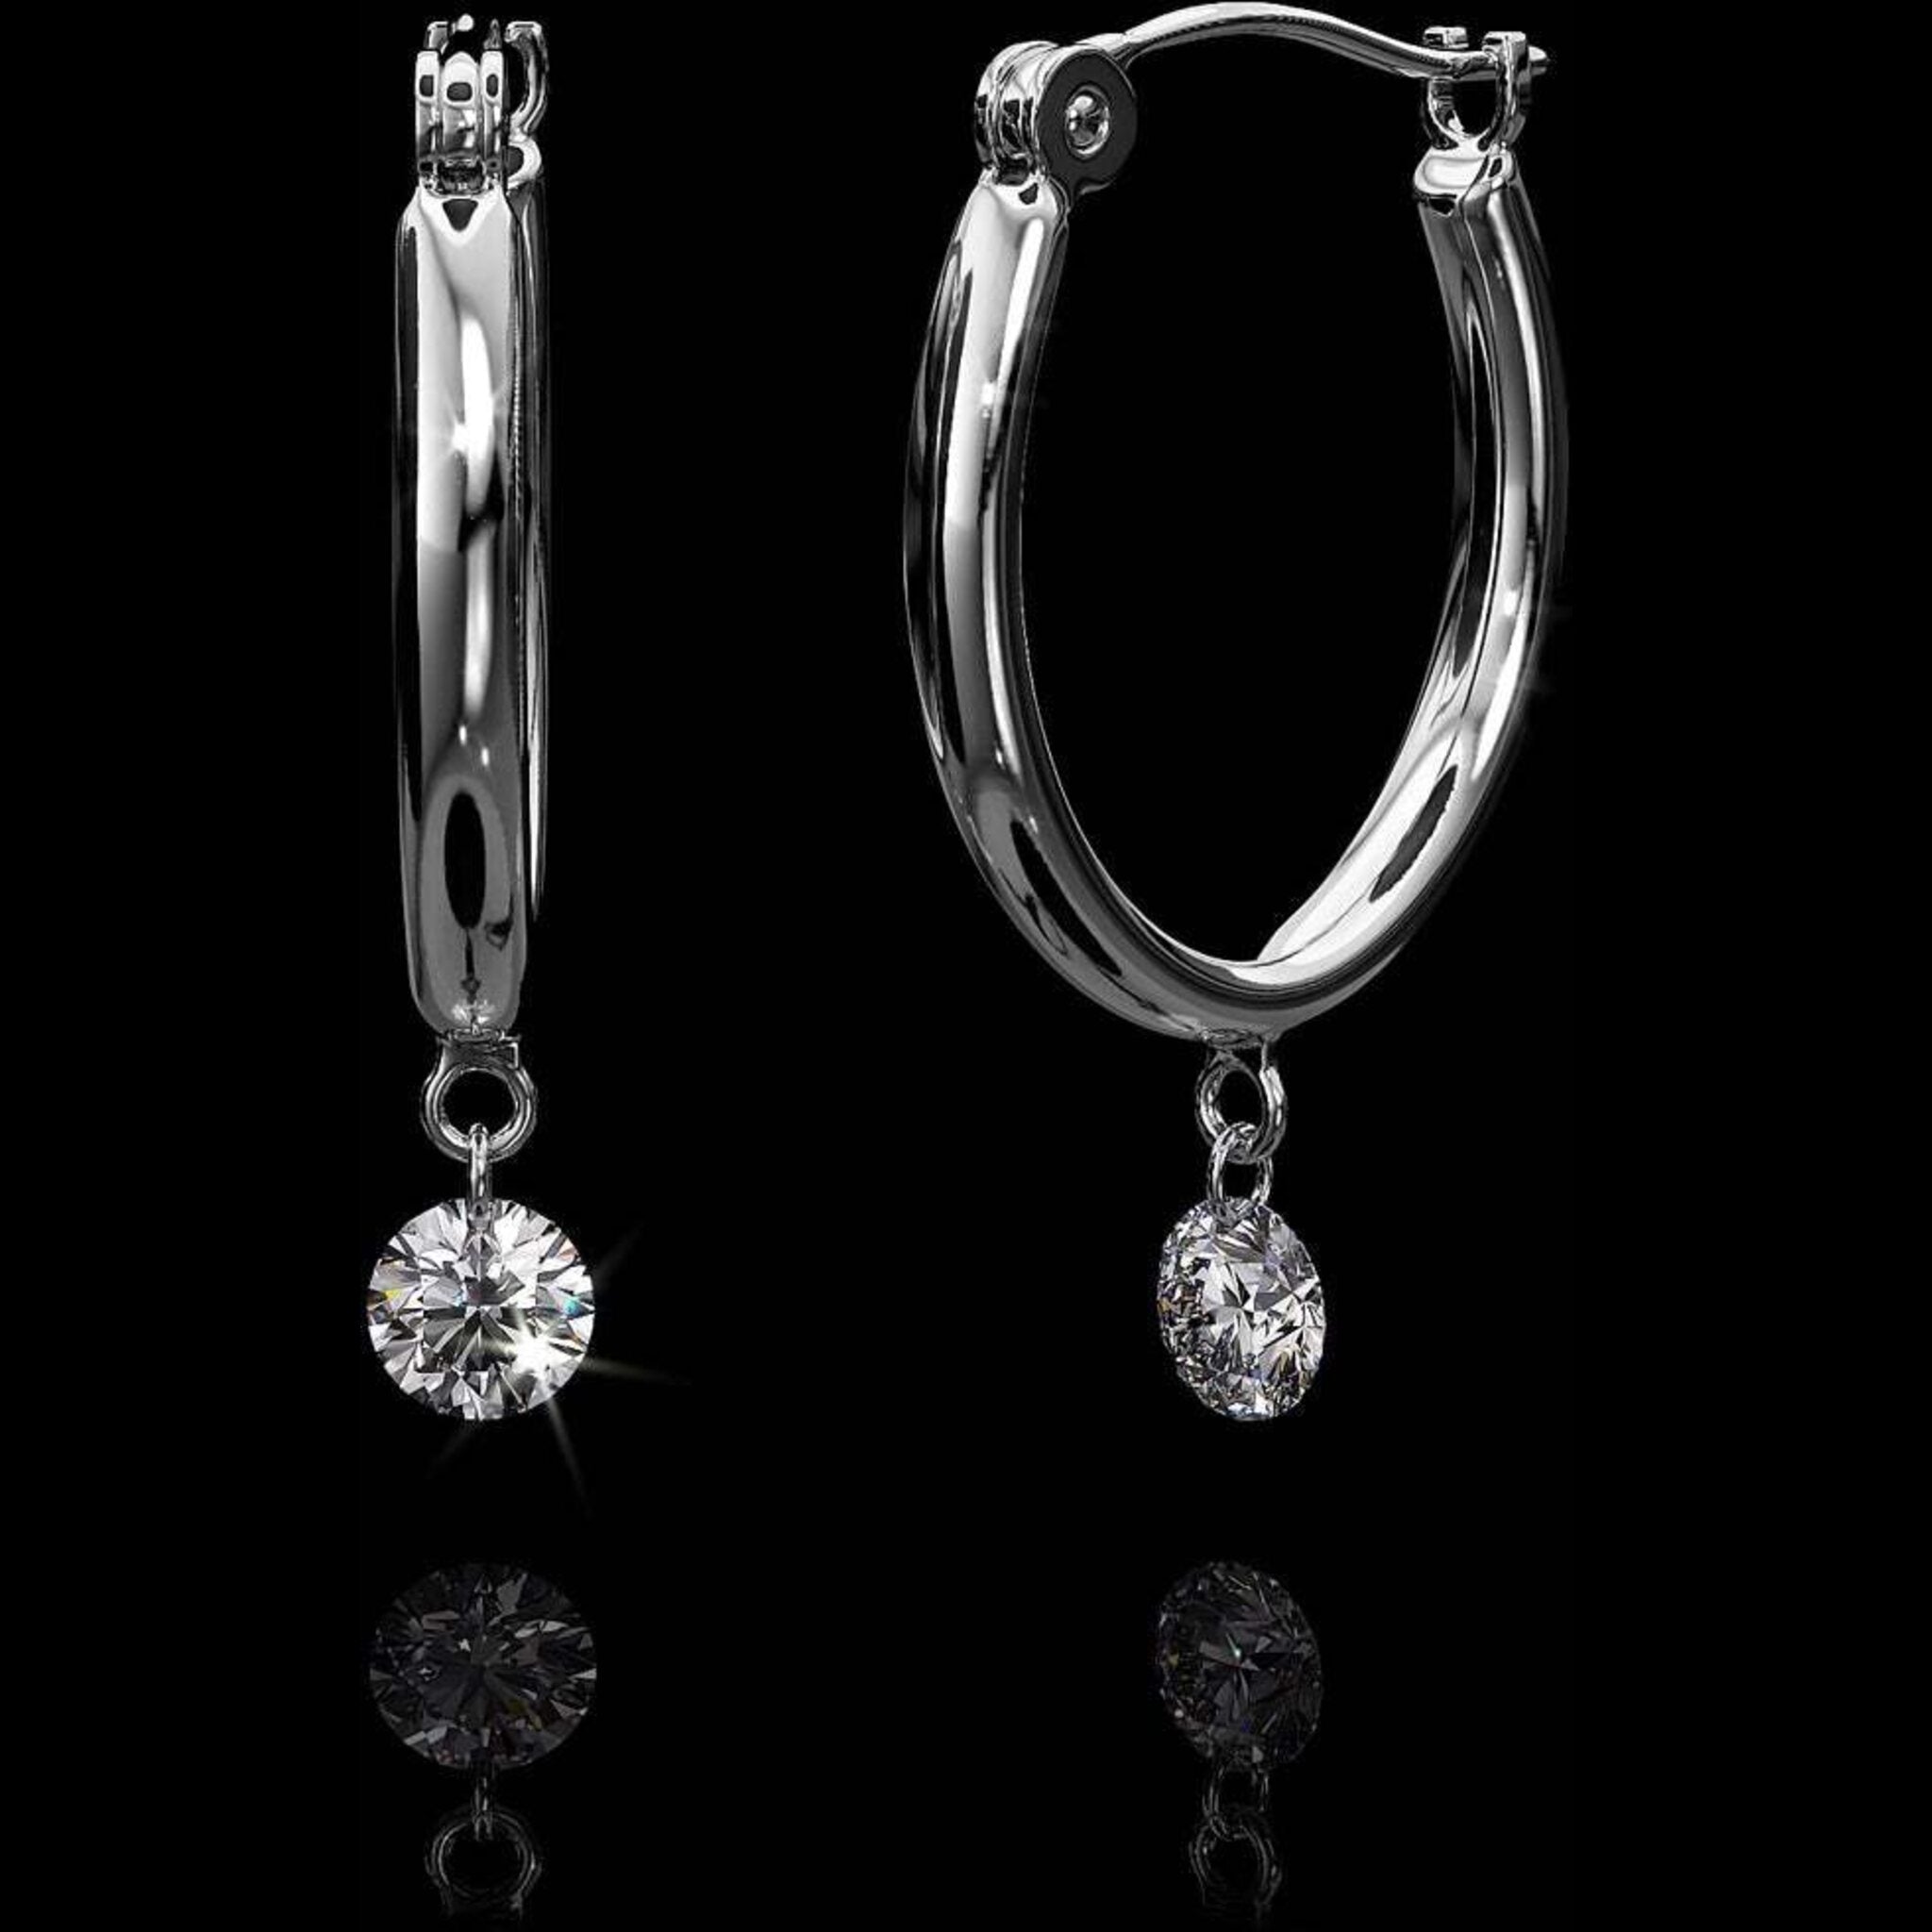 Aresa New York - Lempicka No. 1 Earrings - 18K White Gold with 0.90 cts. of Diamonds